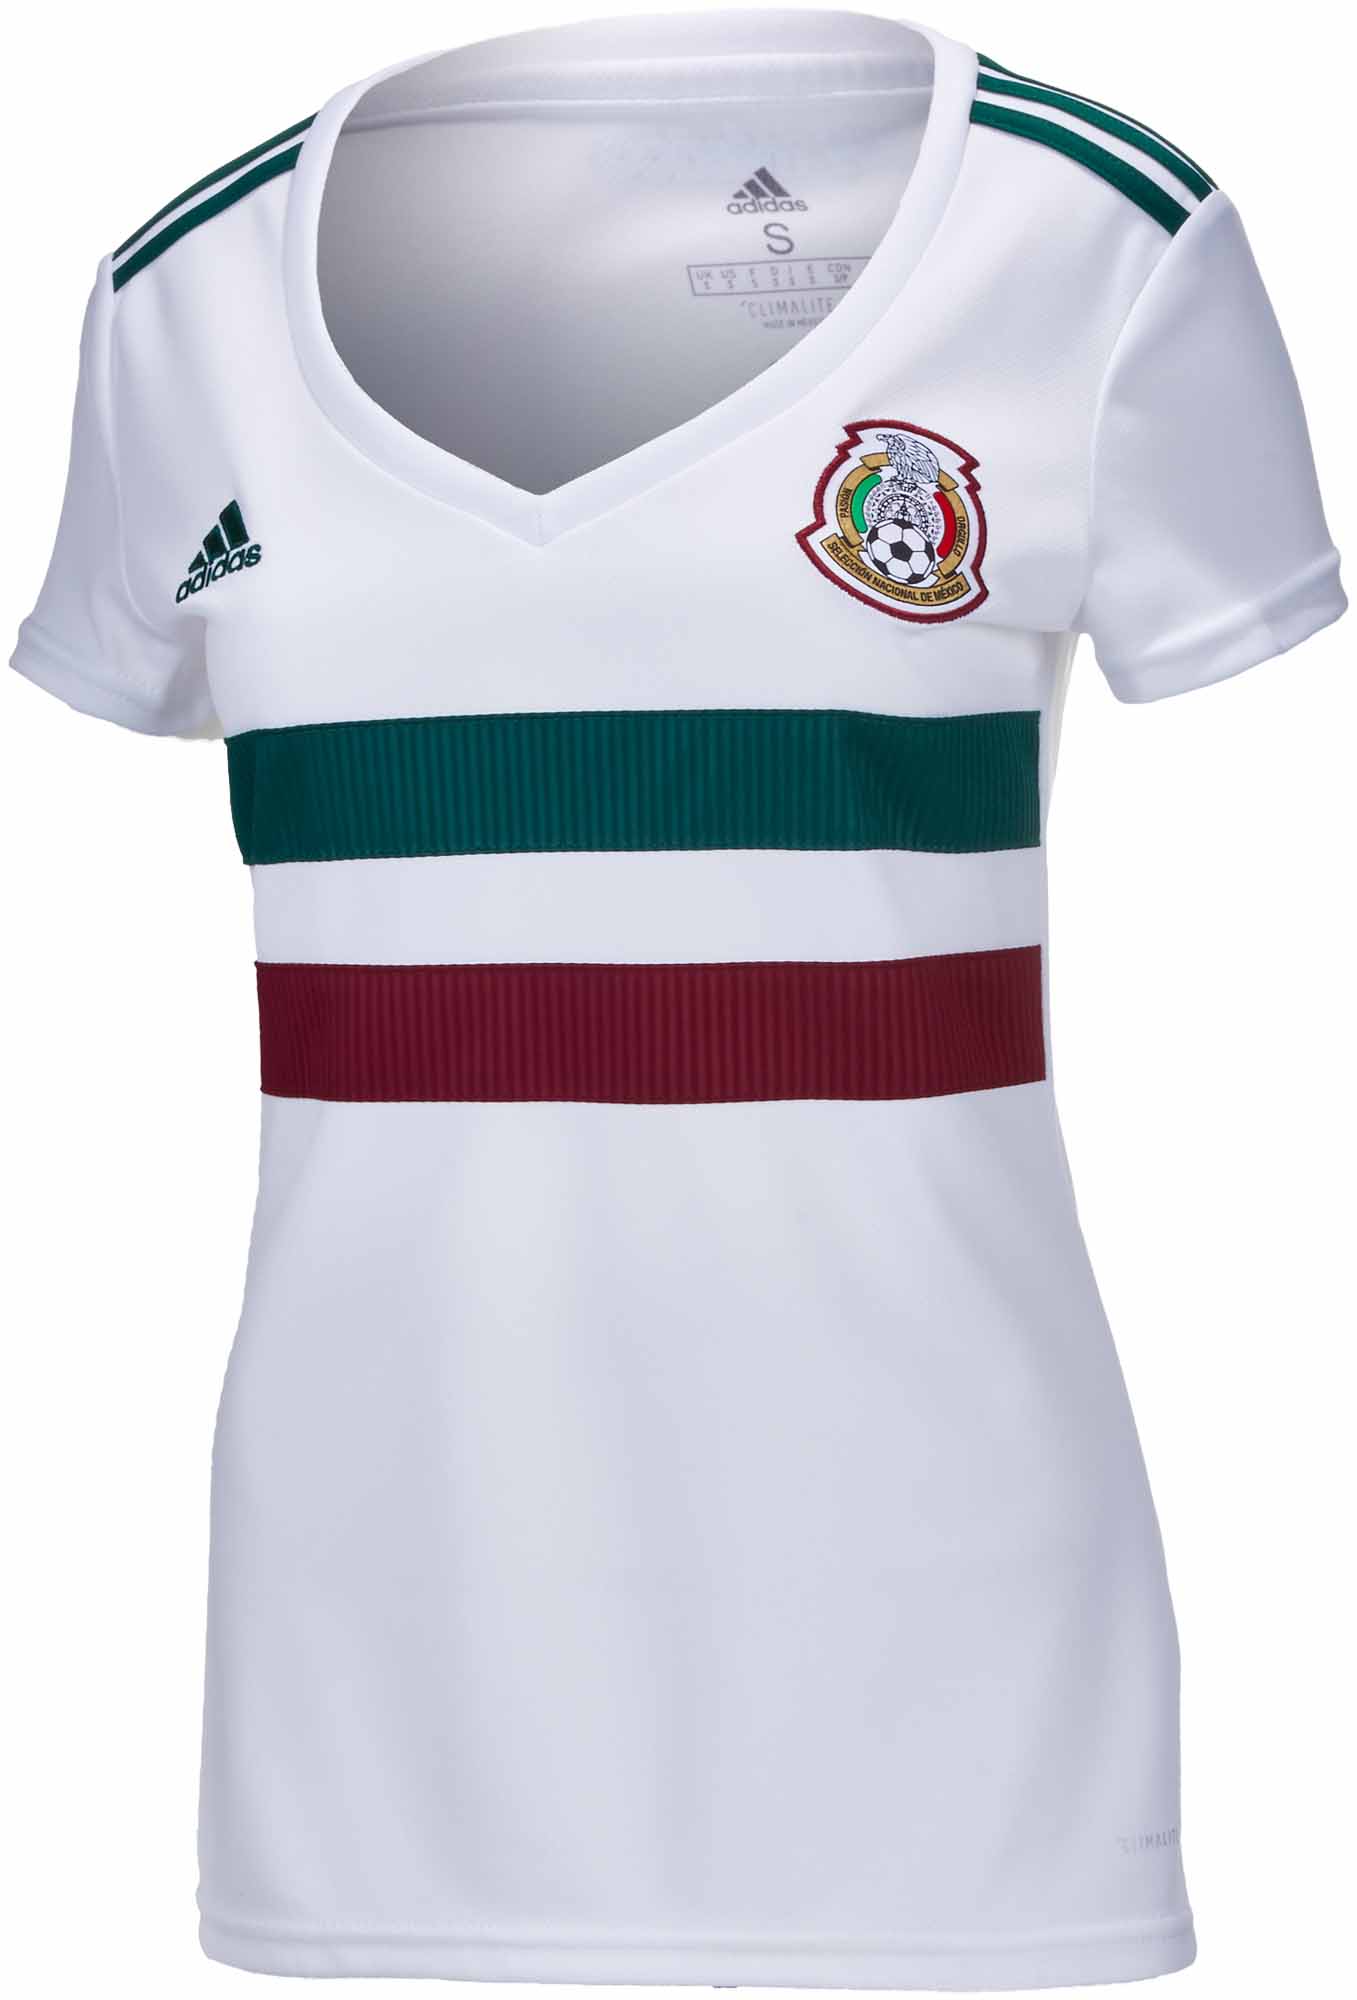 mexico soccer jersey away